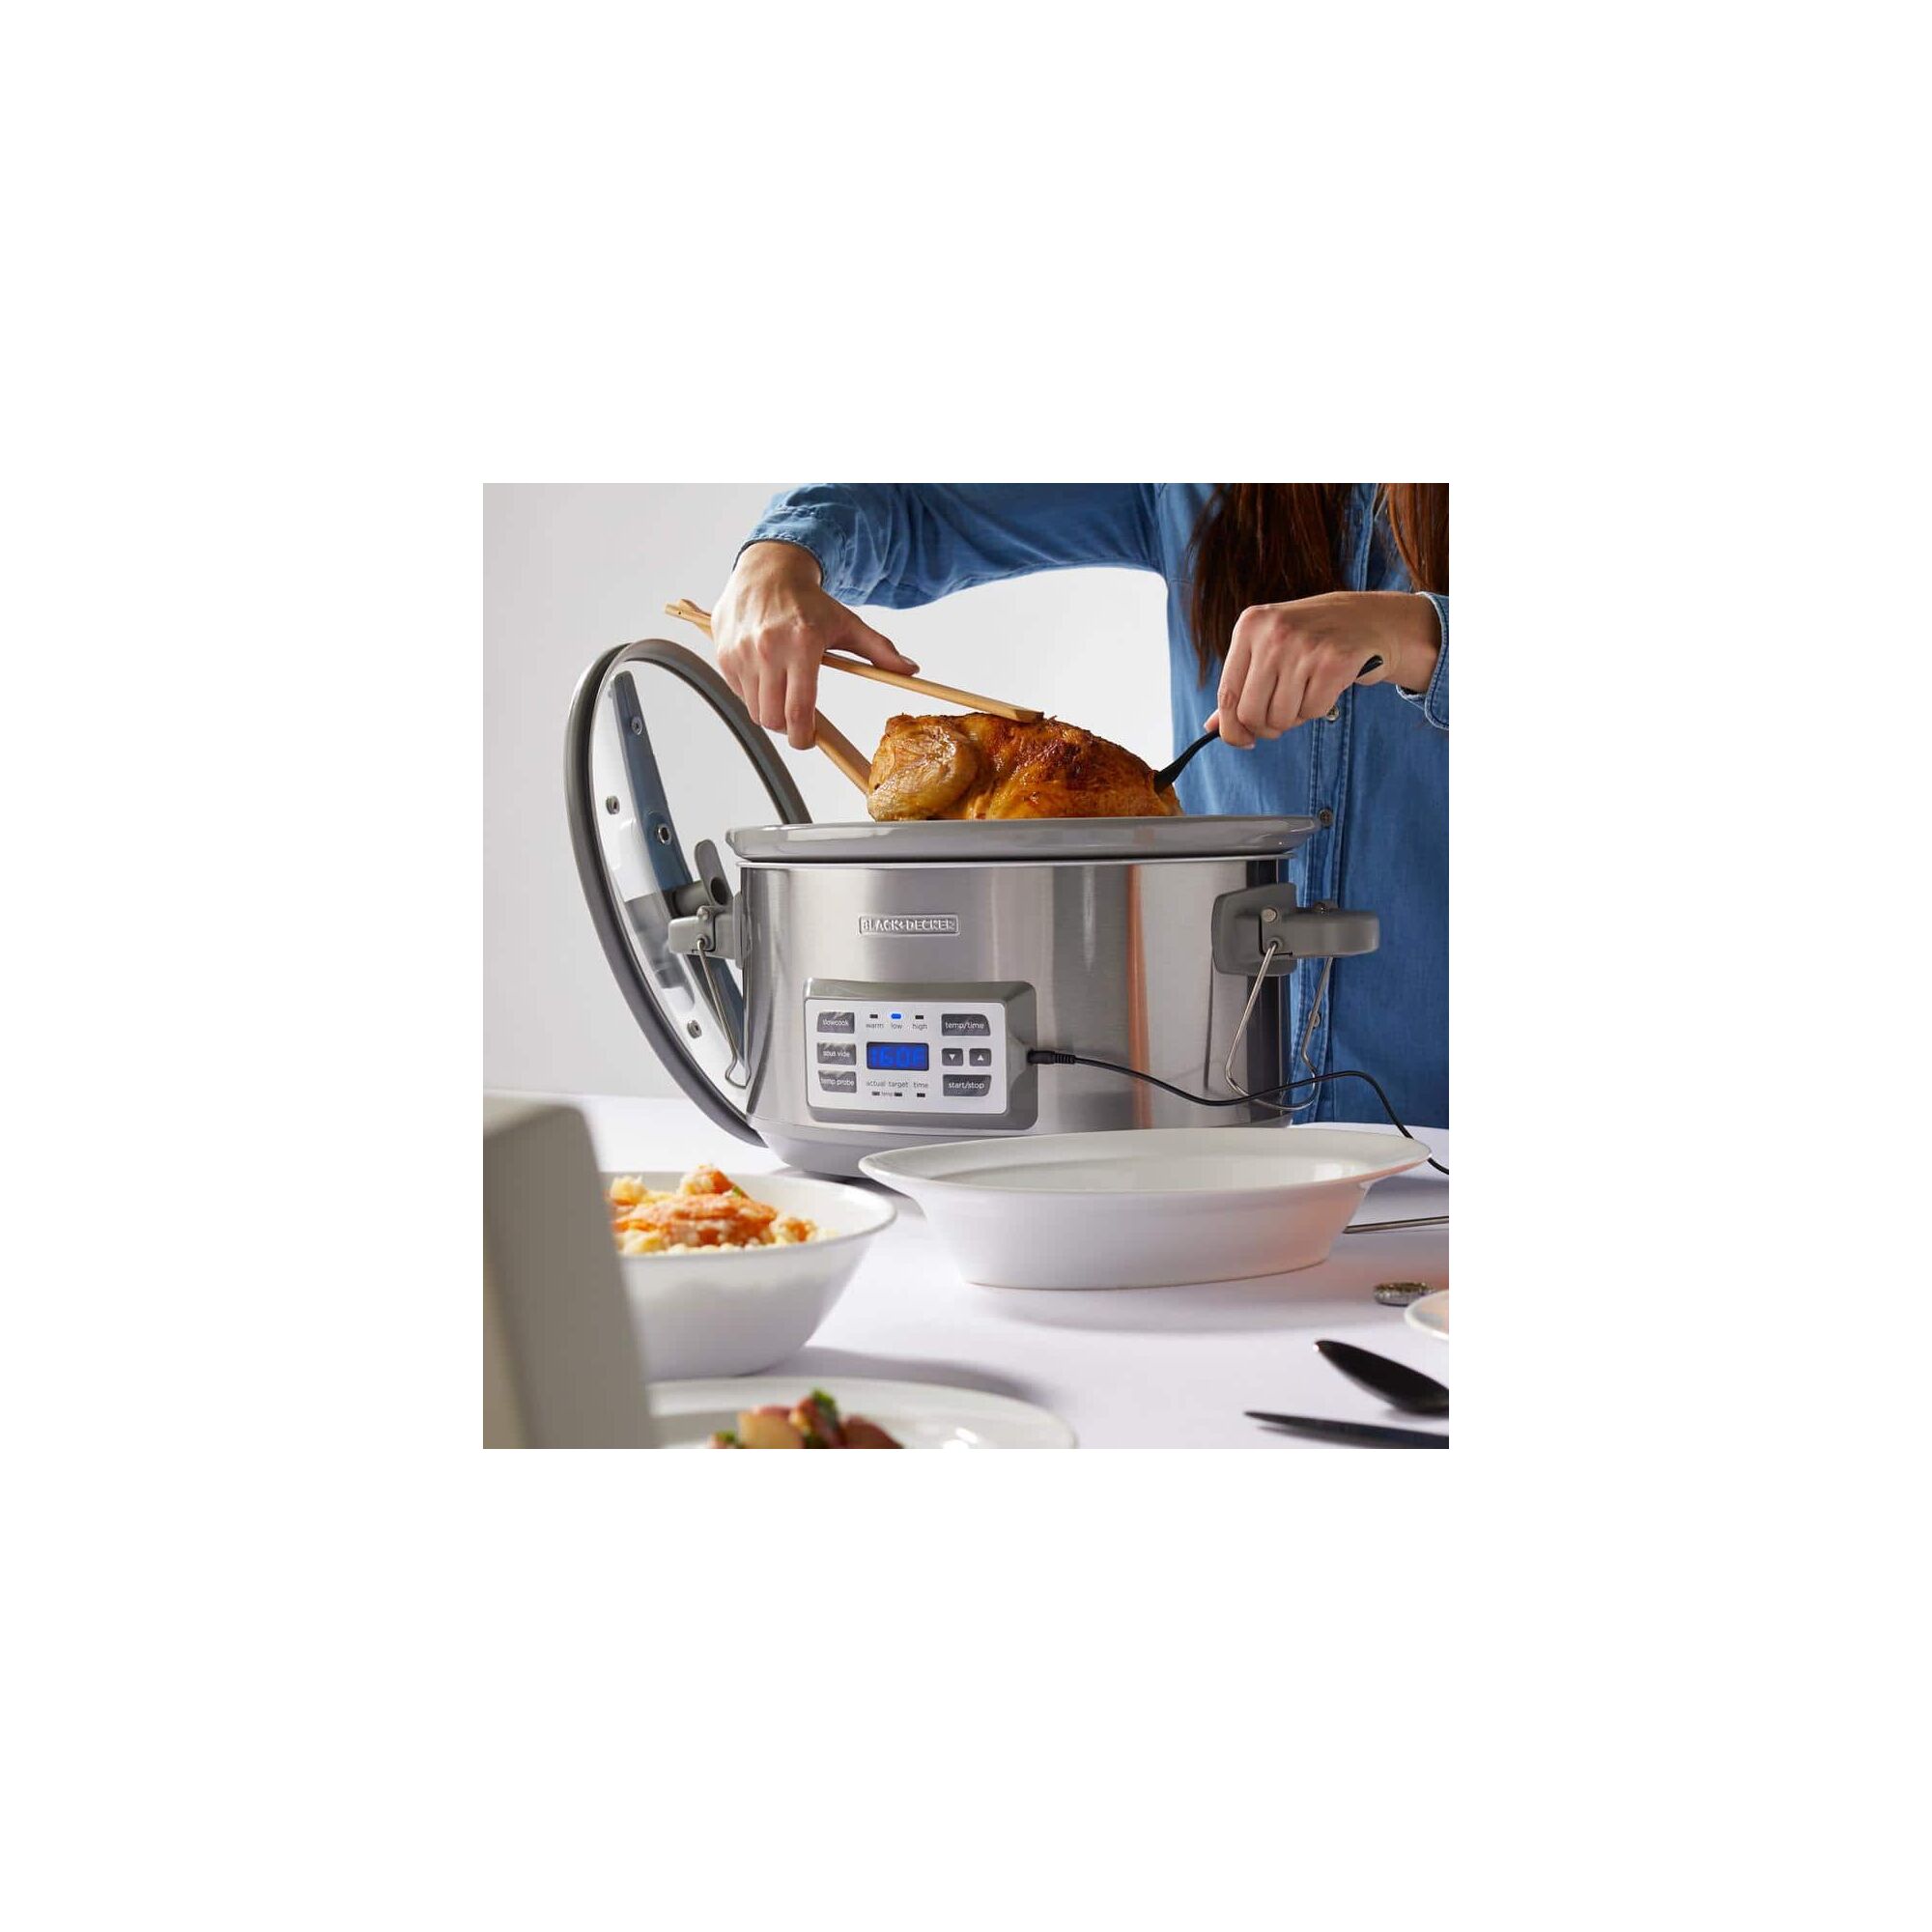 Person cooking with the BLACK+DECKER 7 quart digital slow cooker